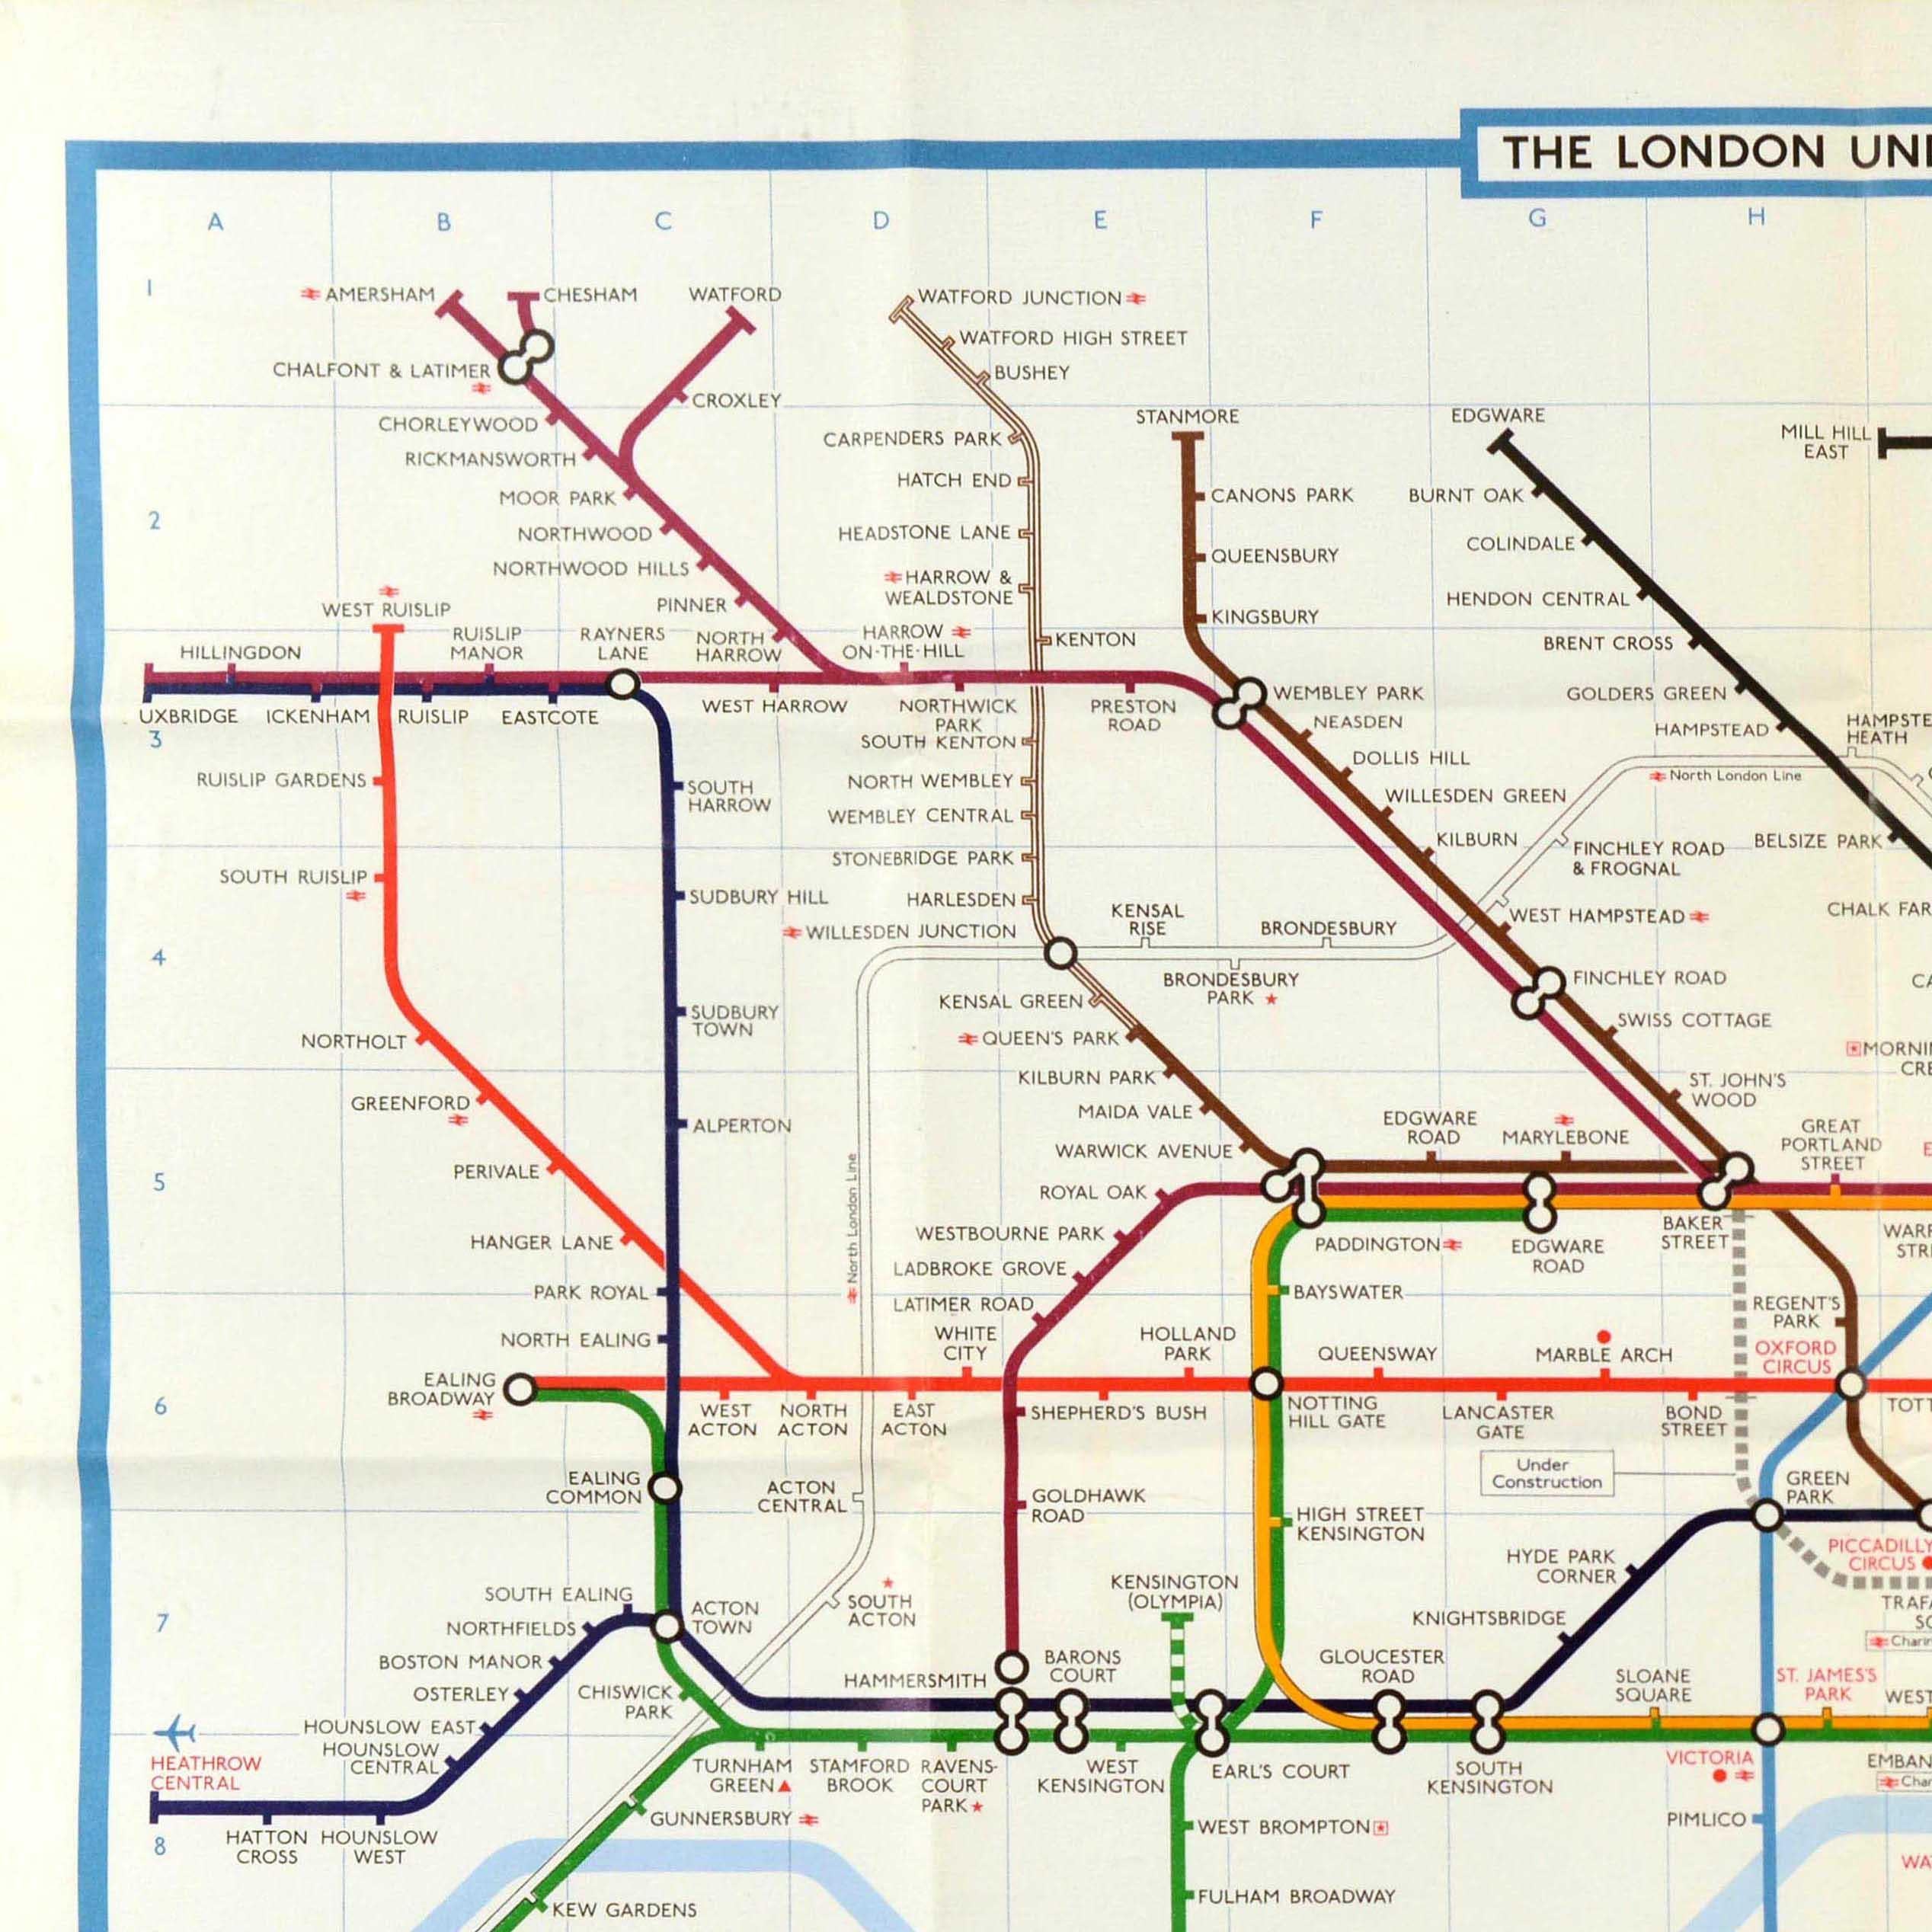 Original vintage tube map poster of The London Underground showing the Central Circle Piccadilly Victoria Northern District Metropolitan and Bakerloo lines, the Jubilee line under construction and the British Rail line with Exhibition Service only